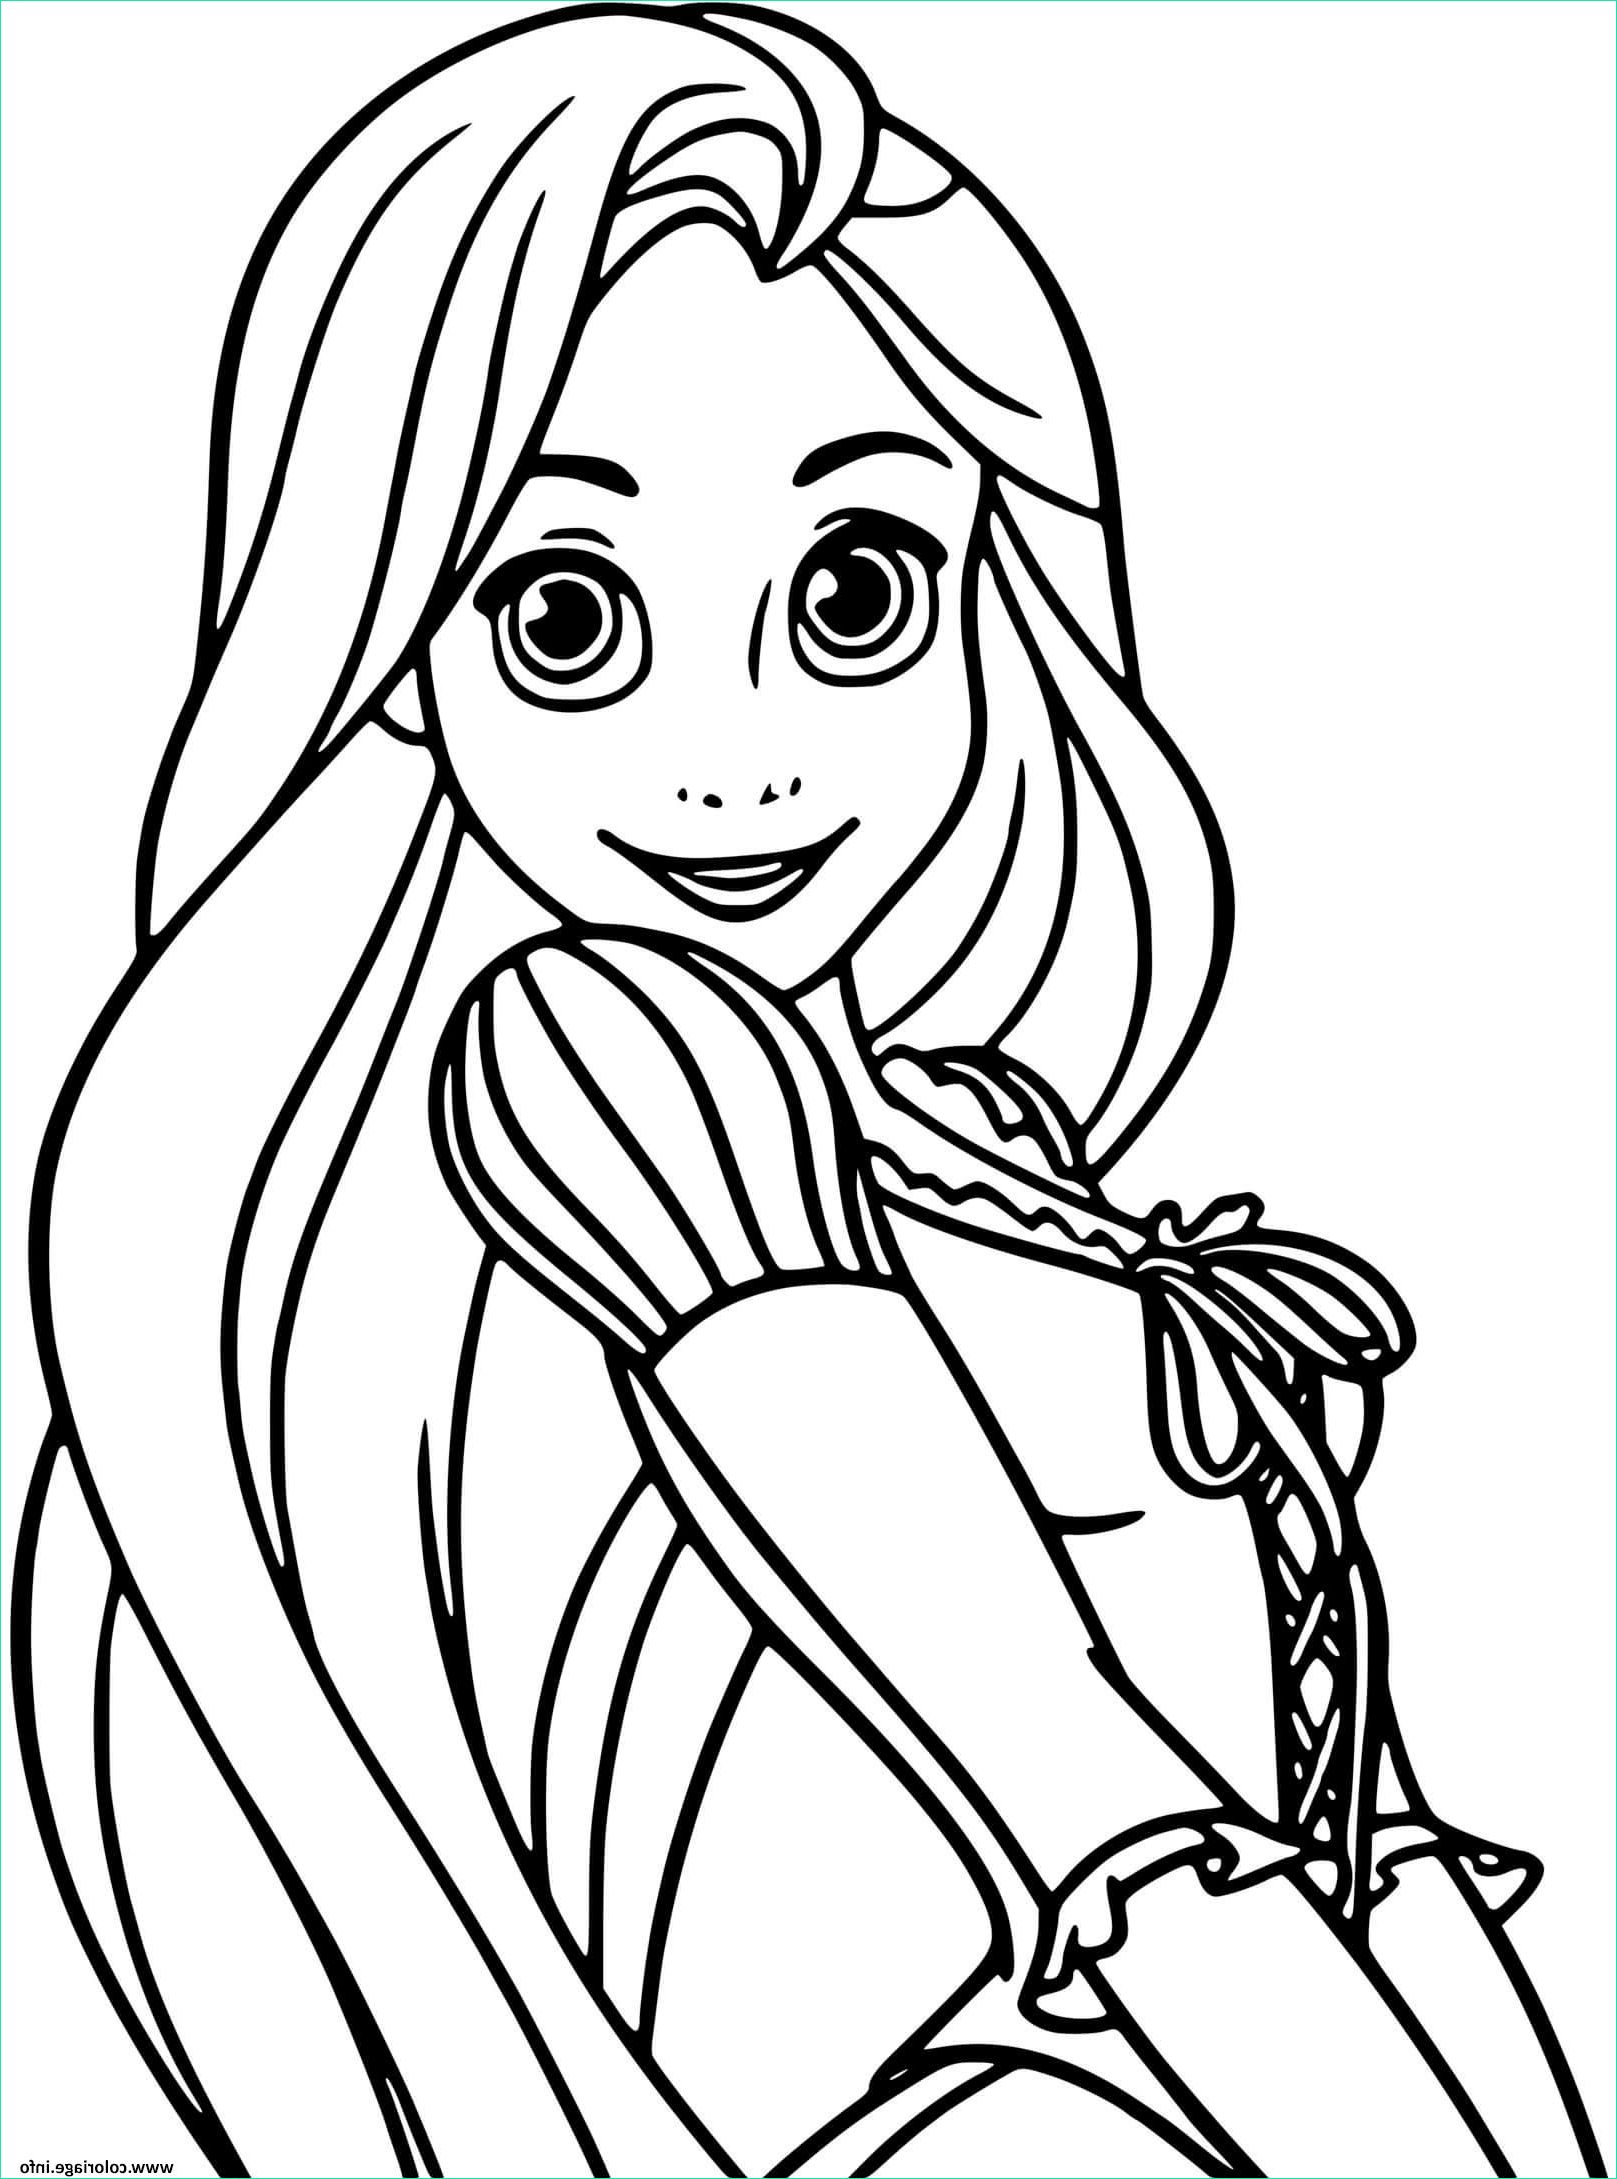 Coloriage Rayponce Inspirant Collection Coloriage Raiponce Dans Raiponce En 2010 Jecolorie